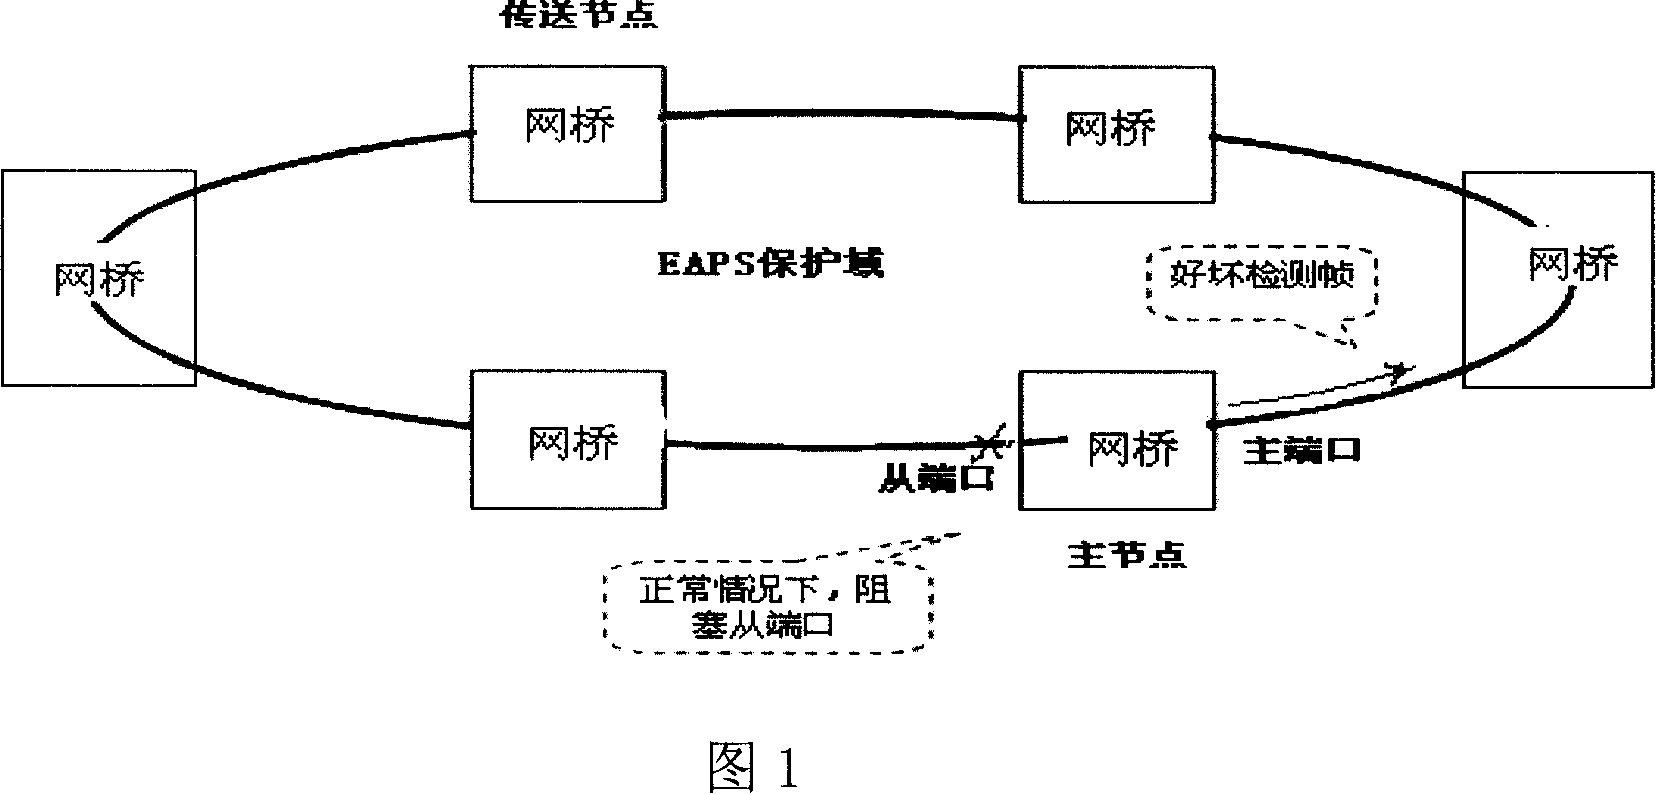 Ethernet automatic protection switching method